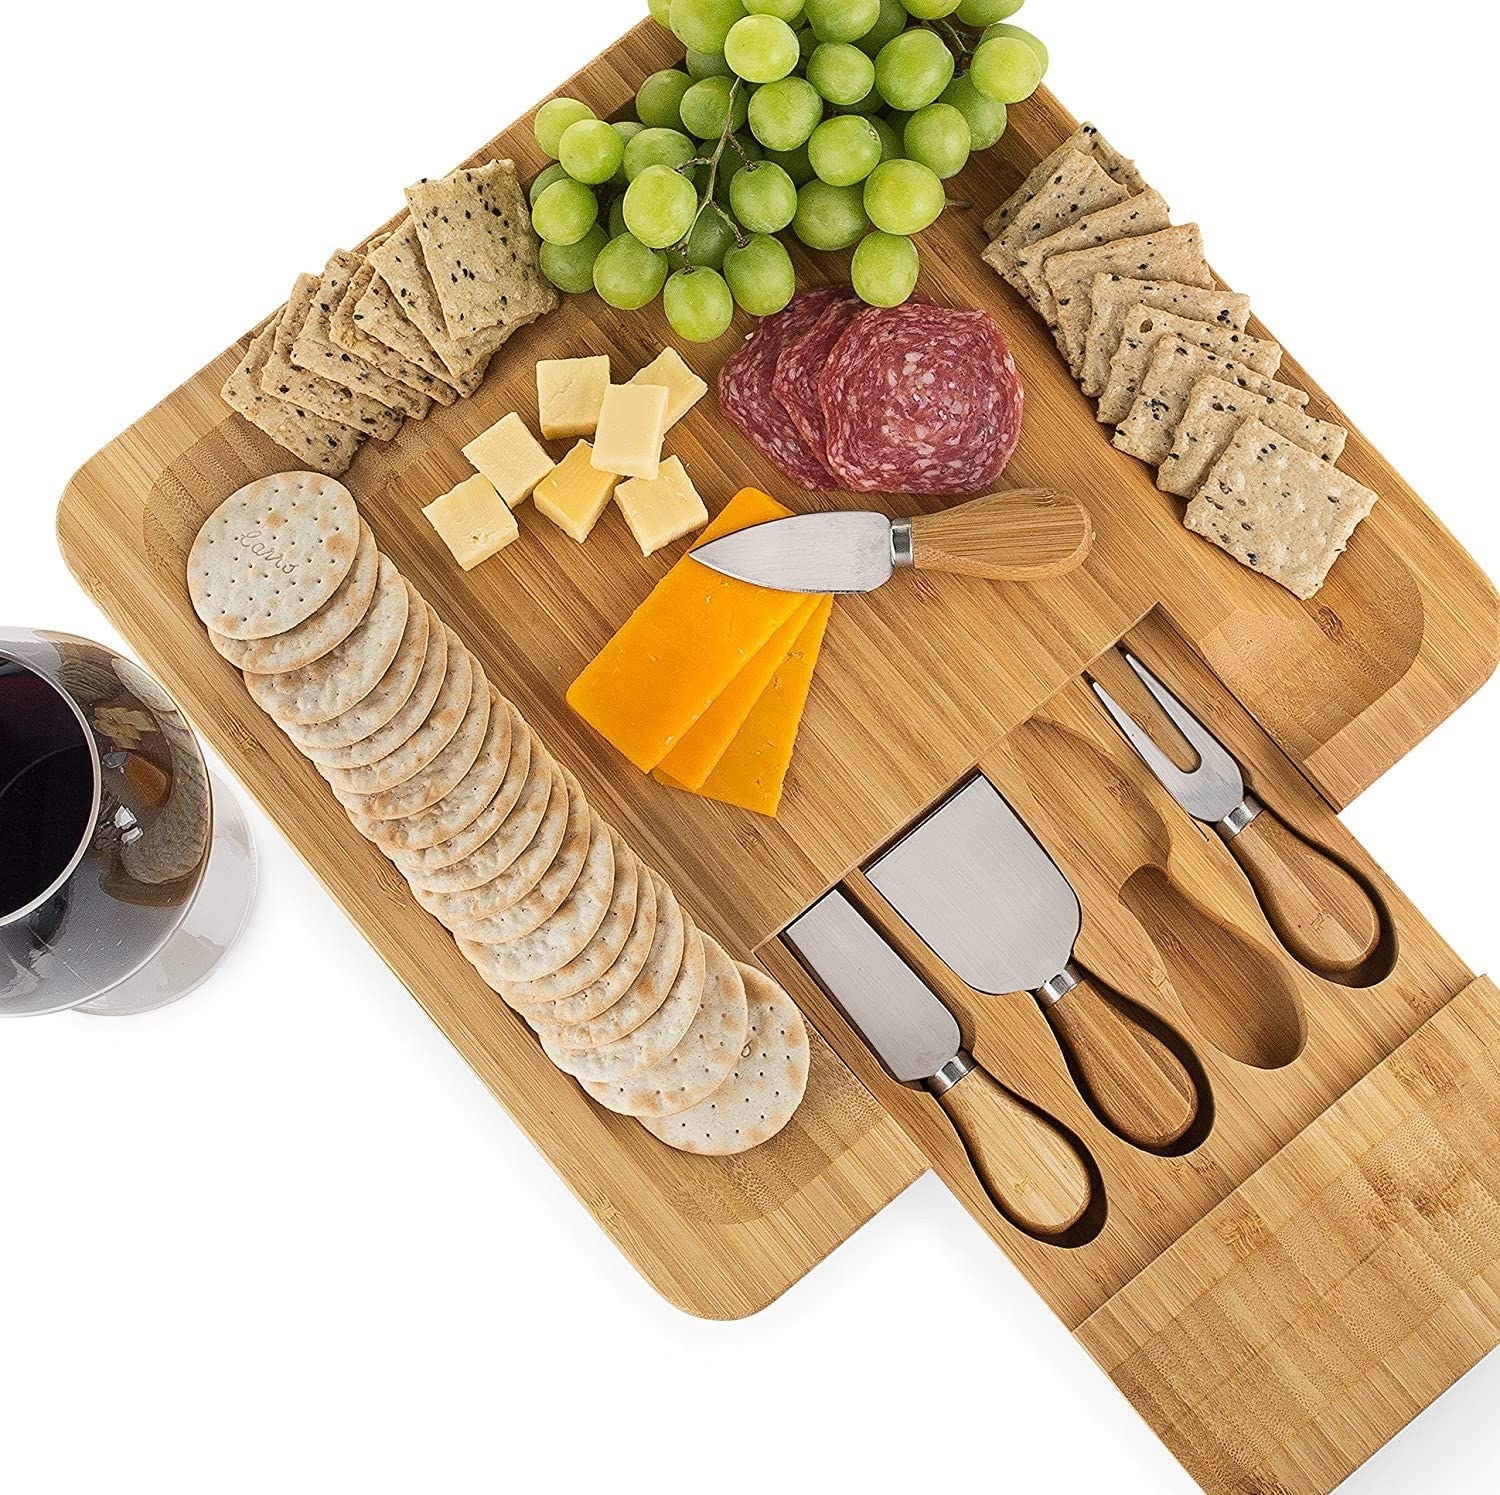 the charcuterie board with cheeses, crackers, and grapes